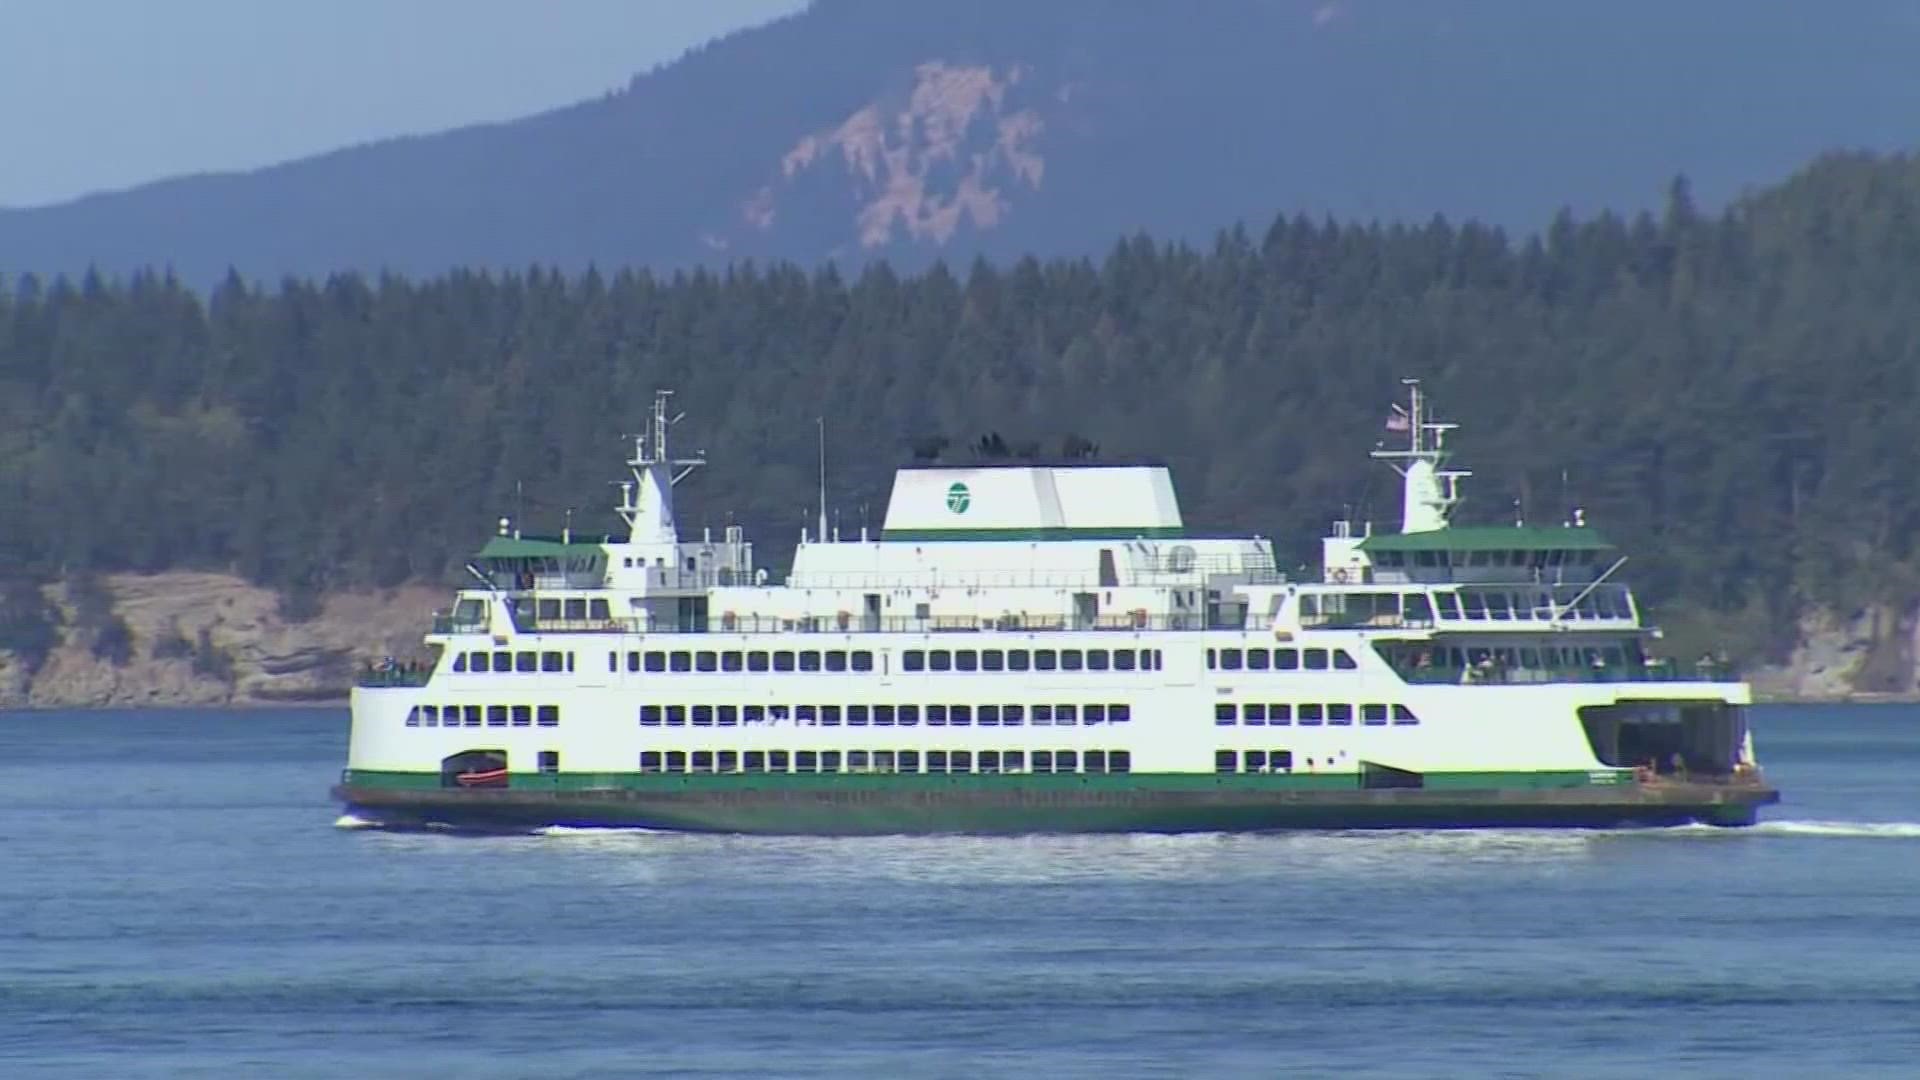 The head of Washington State Ferries said a COVID-19 outbreak led to a staffing shortage and the mass cancellation of sailings this past weekend.